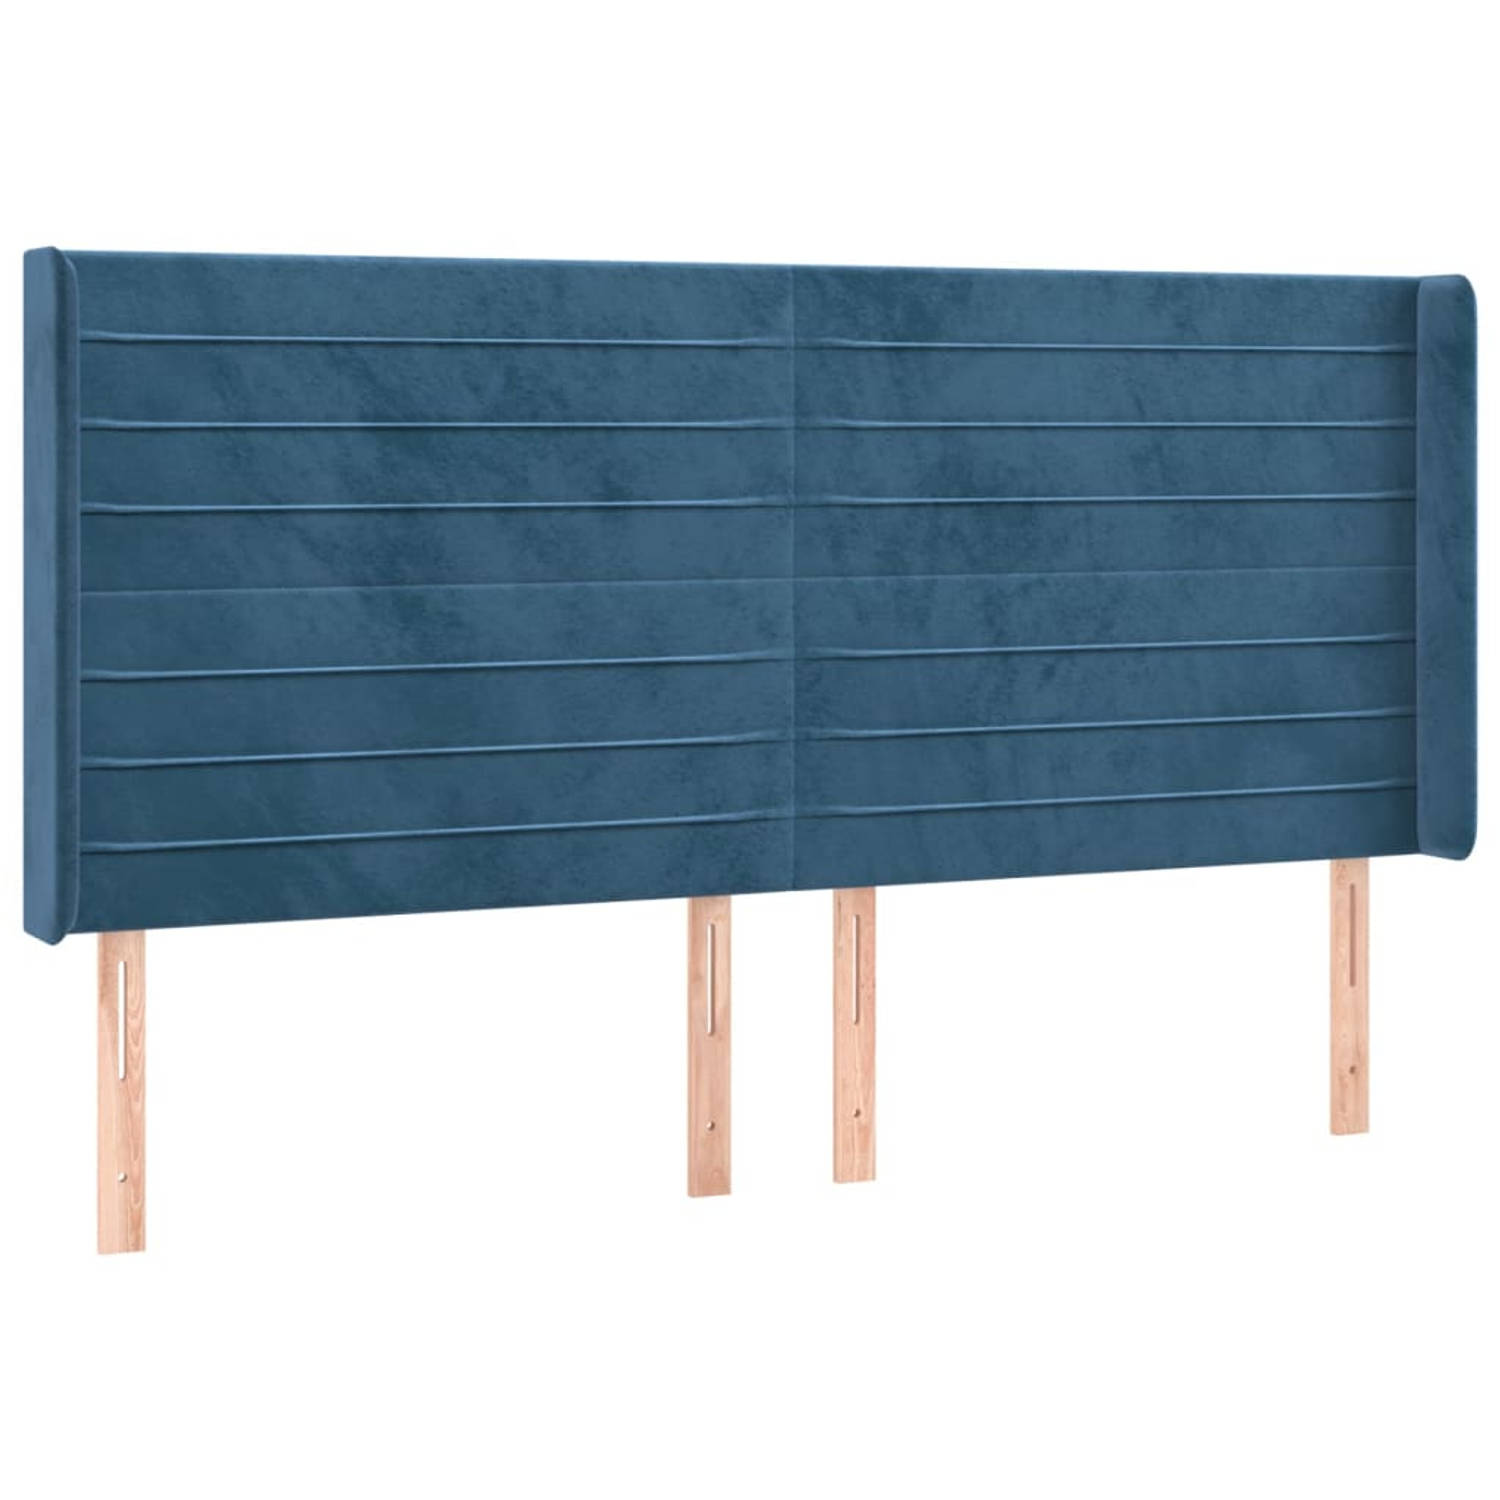 The Living Store Hoofdbord Bed - Donkerblauw - 203 x 16 x 118/128 cm